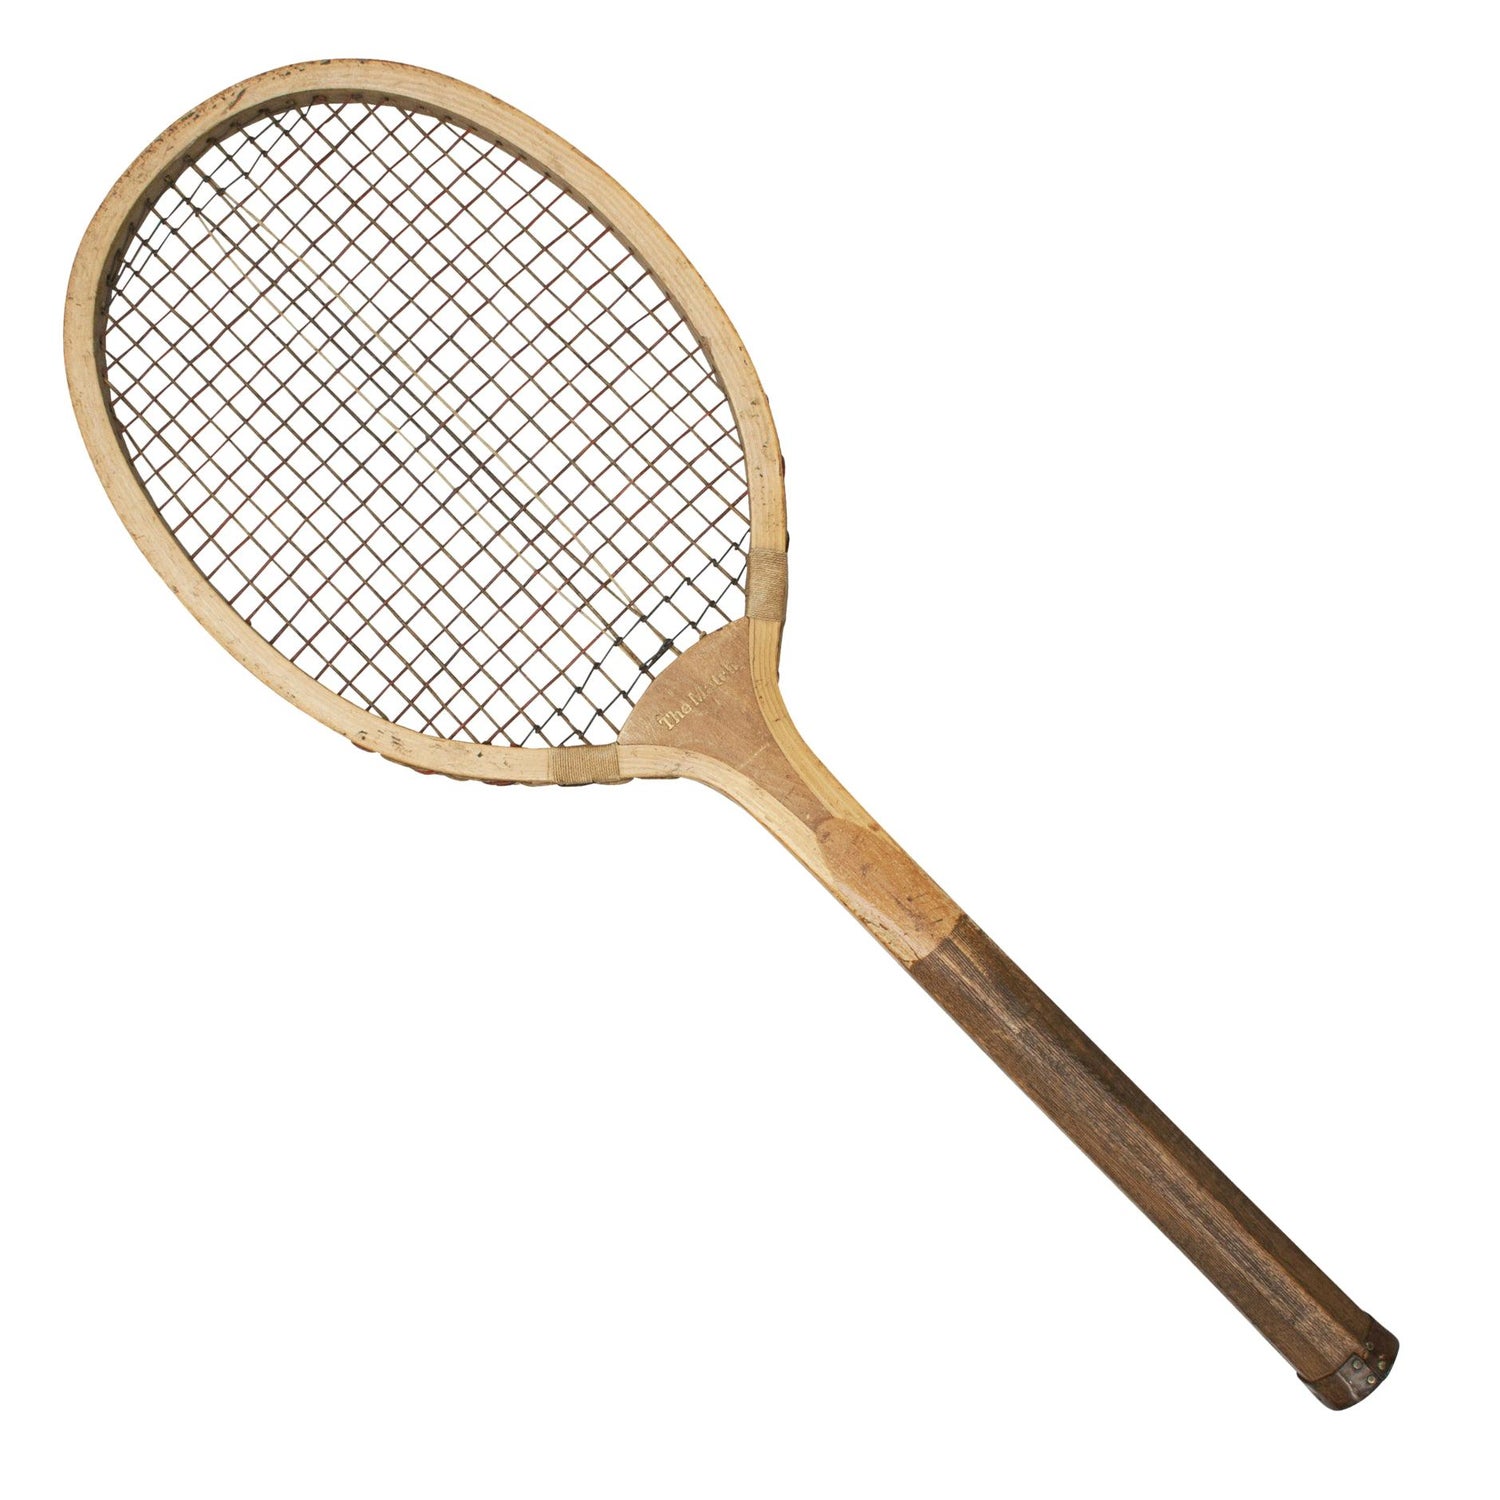 Wooden Lawn Tennis Racket, the Service, Ltc For Sale at 1stDibs